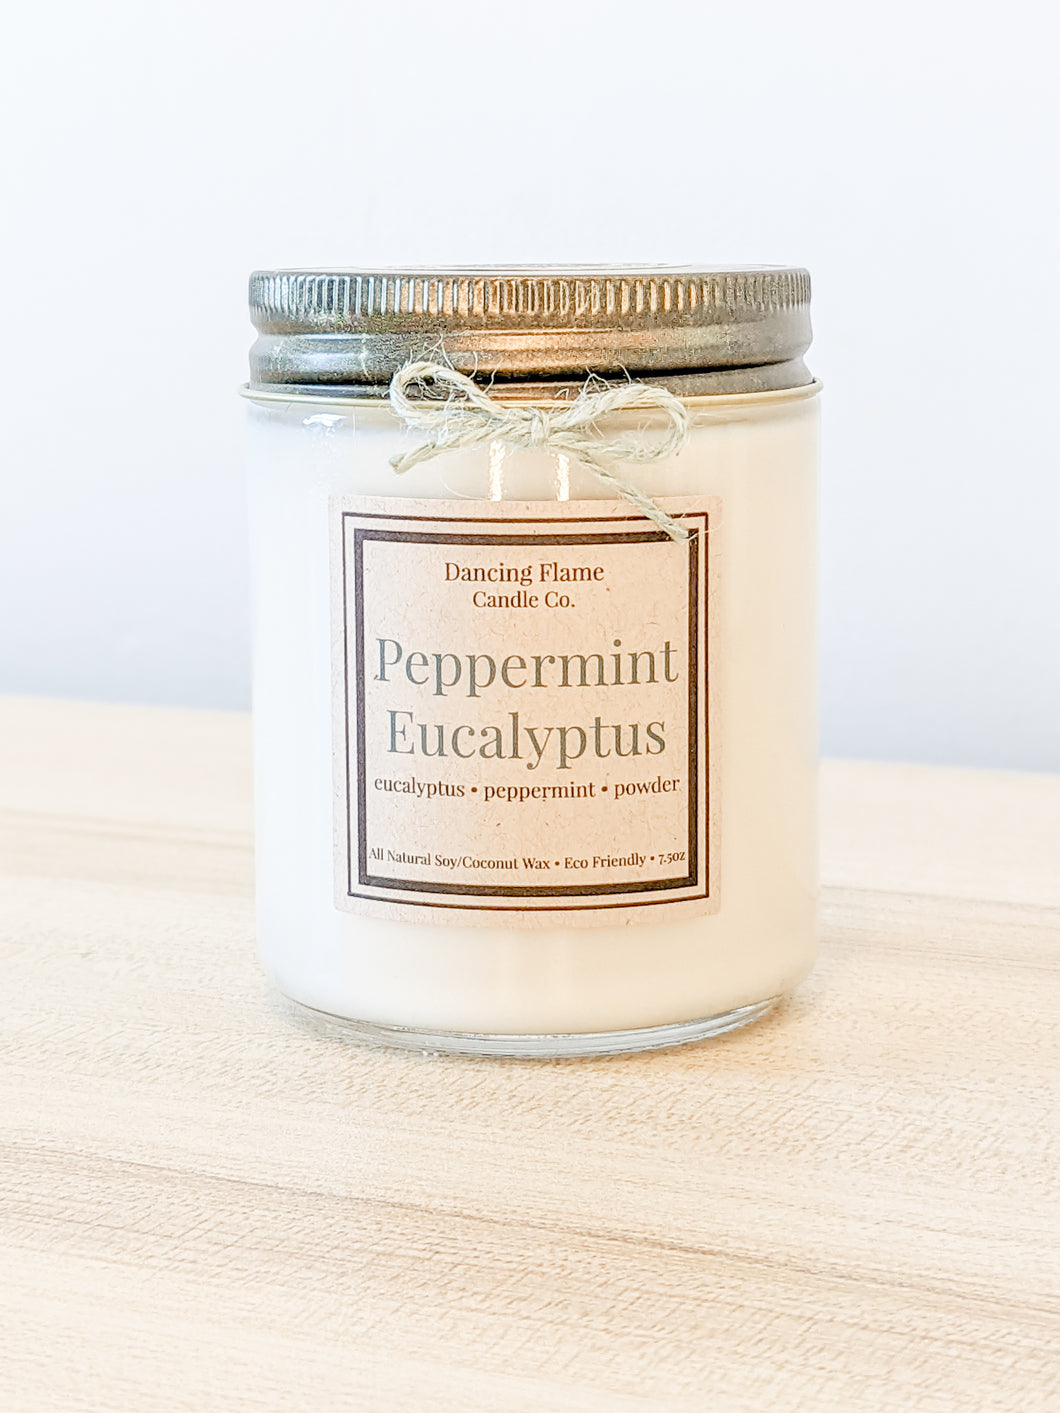 Peppermint & Eucalyptus Soy/Coconut Wax Candle